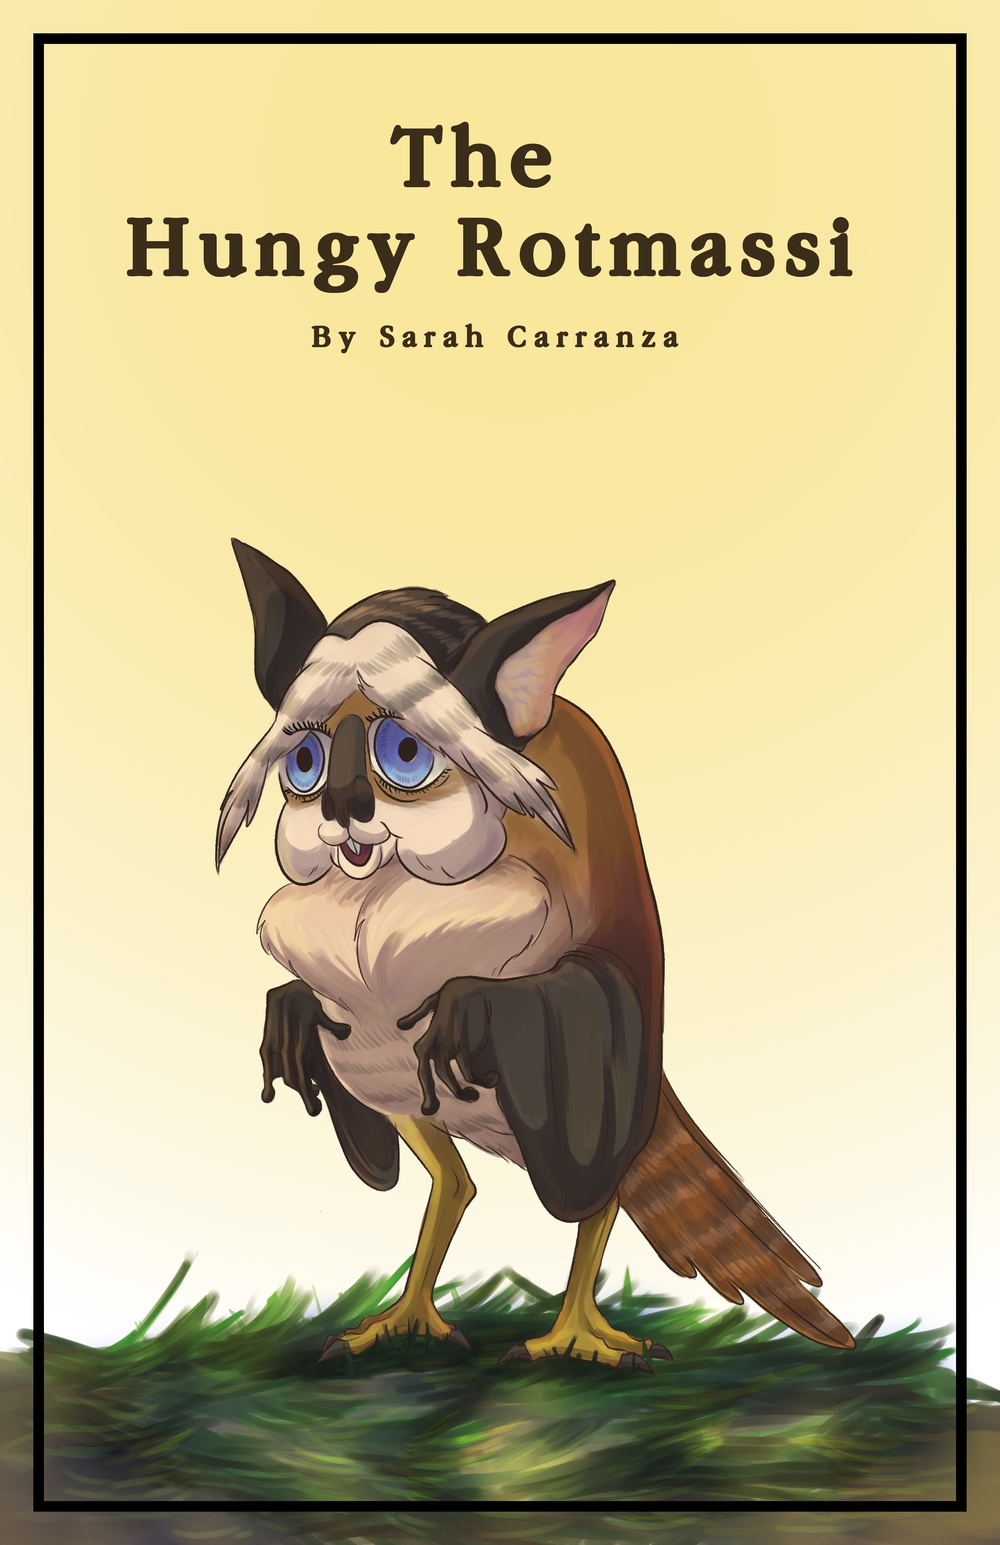 Text: The Hungy Rotmassi, by Sarah Carranza. The small creature standing, has large blue eyes, a koala nose, chipmunk cheeks, and large, bat-like ears. It has a puff of beige fur on its chest and its arms are those of a flying squirrel with extra saggy skin attached. The bottom half of its body is bird like with a bird tail and yellow bird feet. This creature is standing on a pile of grass. 